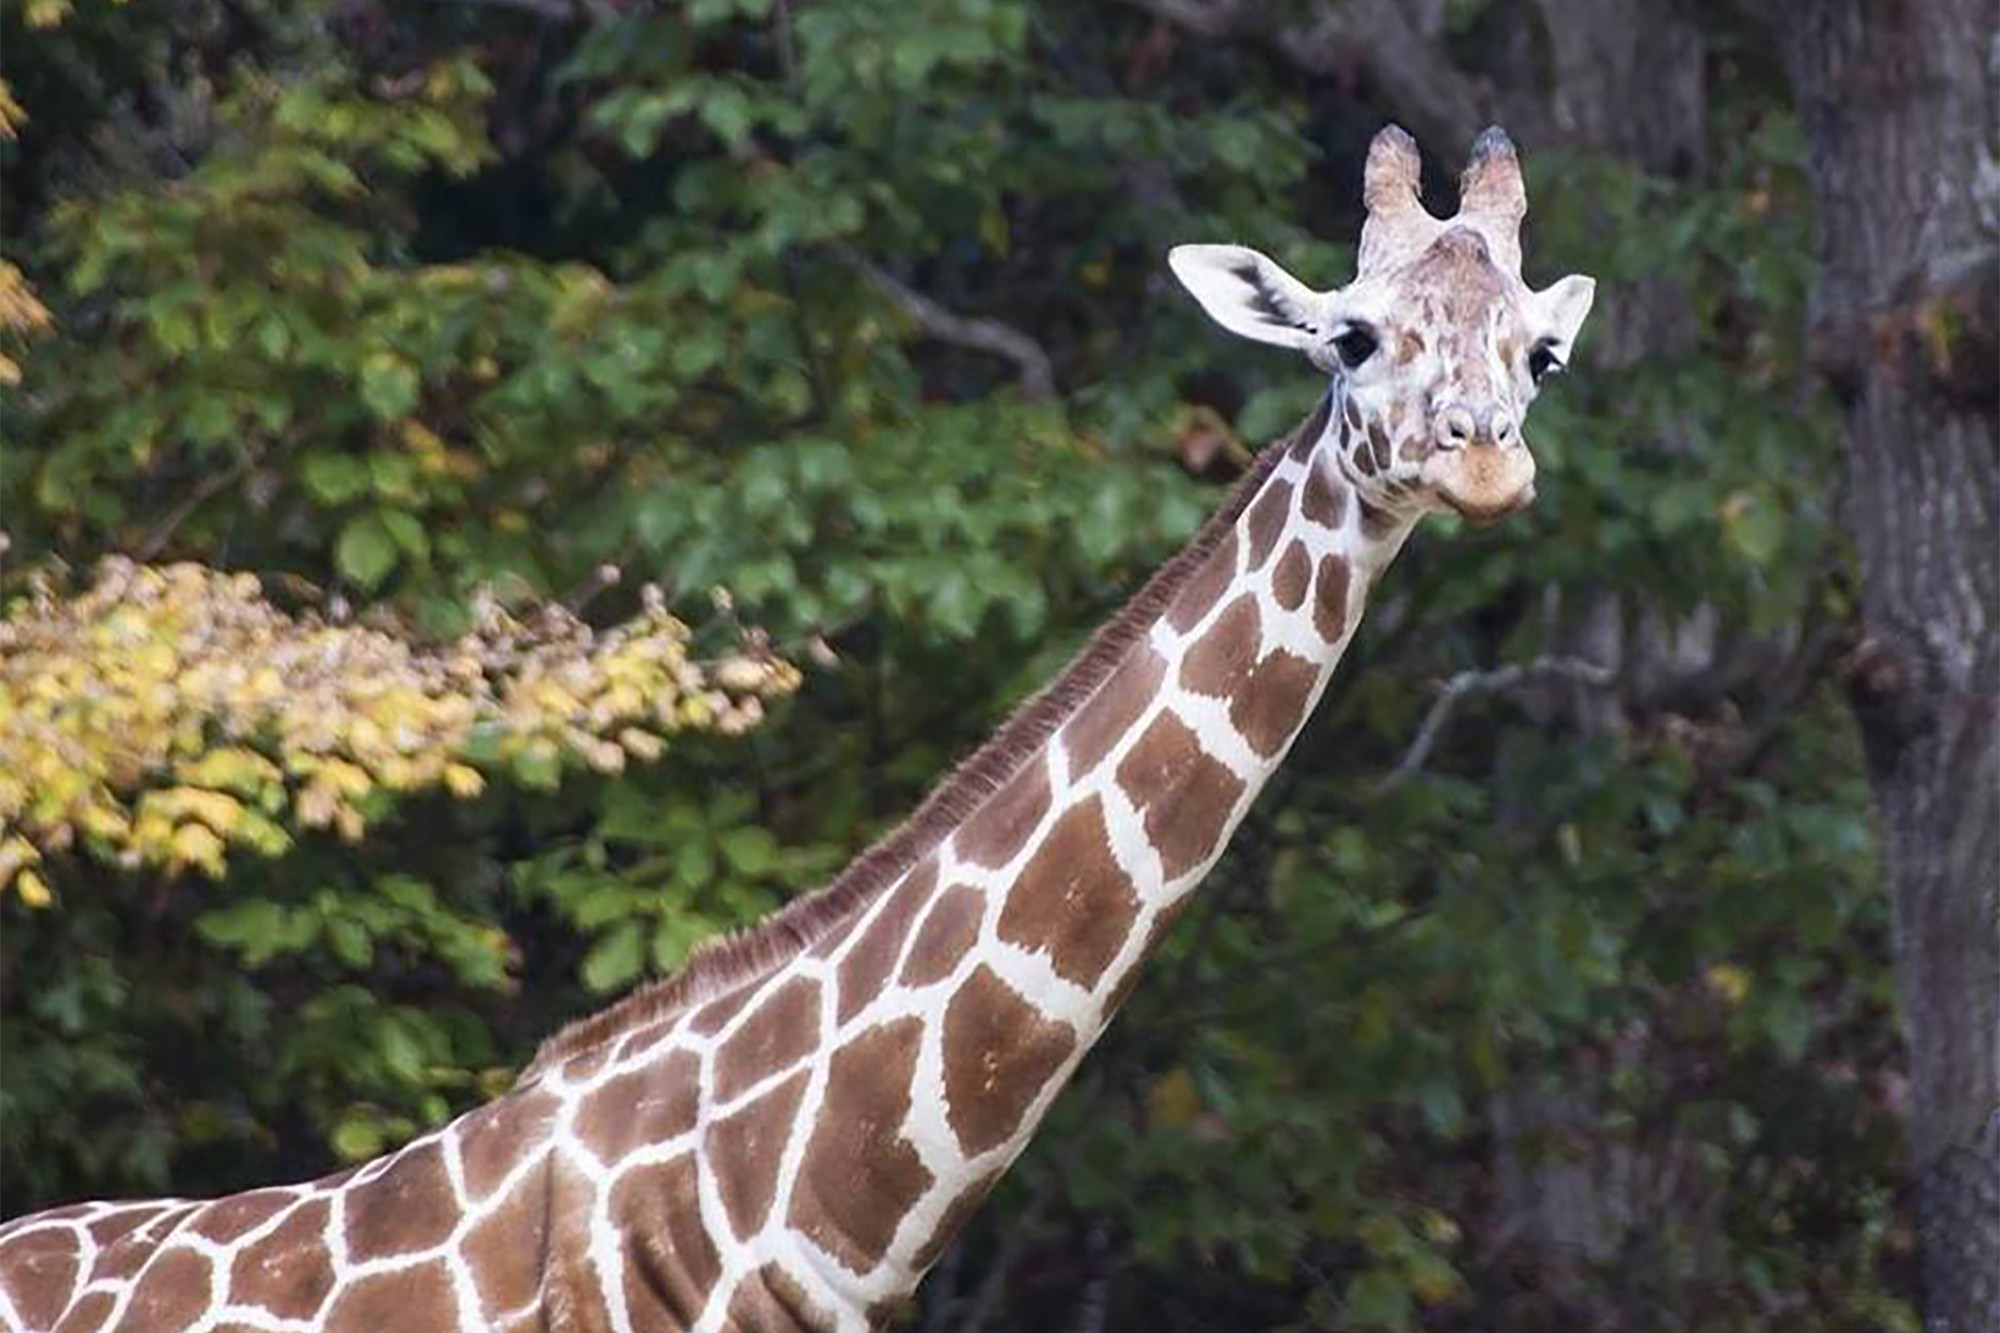 Giraffe's death by zoo toy prompts investigation